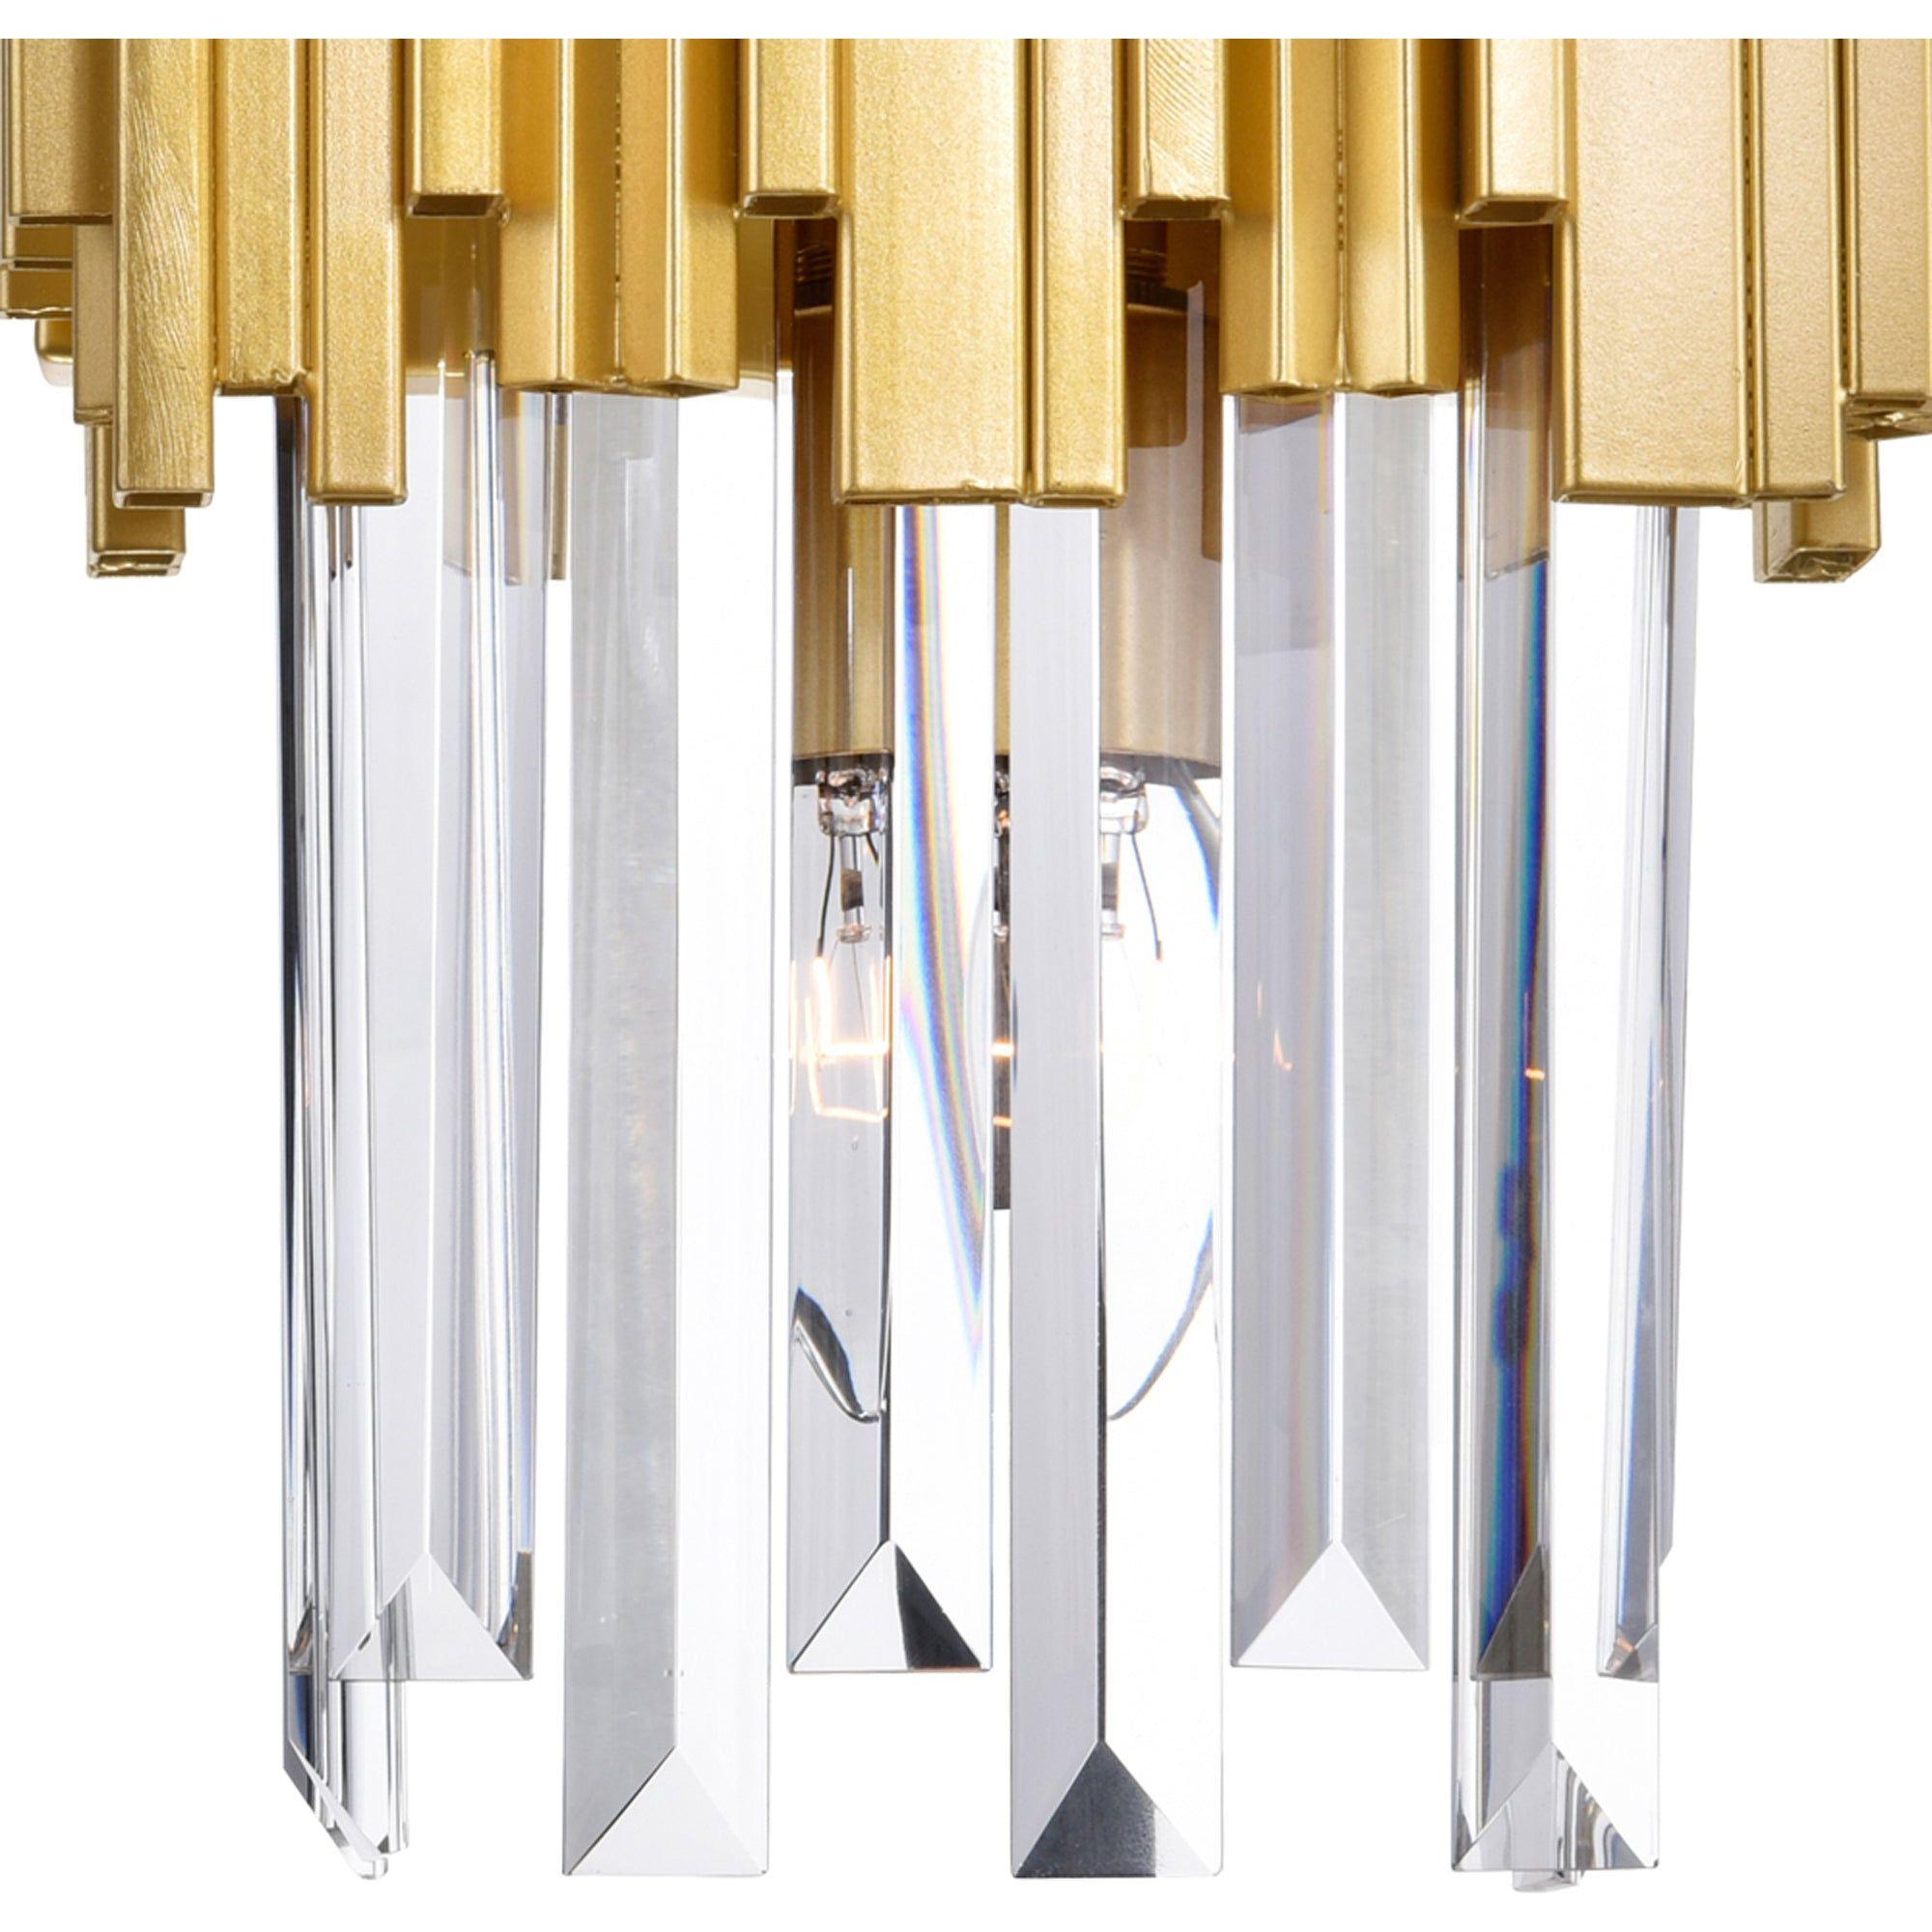 CWI - Deco Sconce - Lights Canada